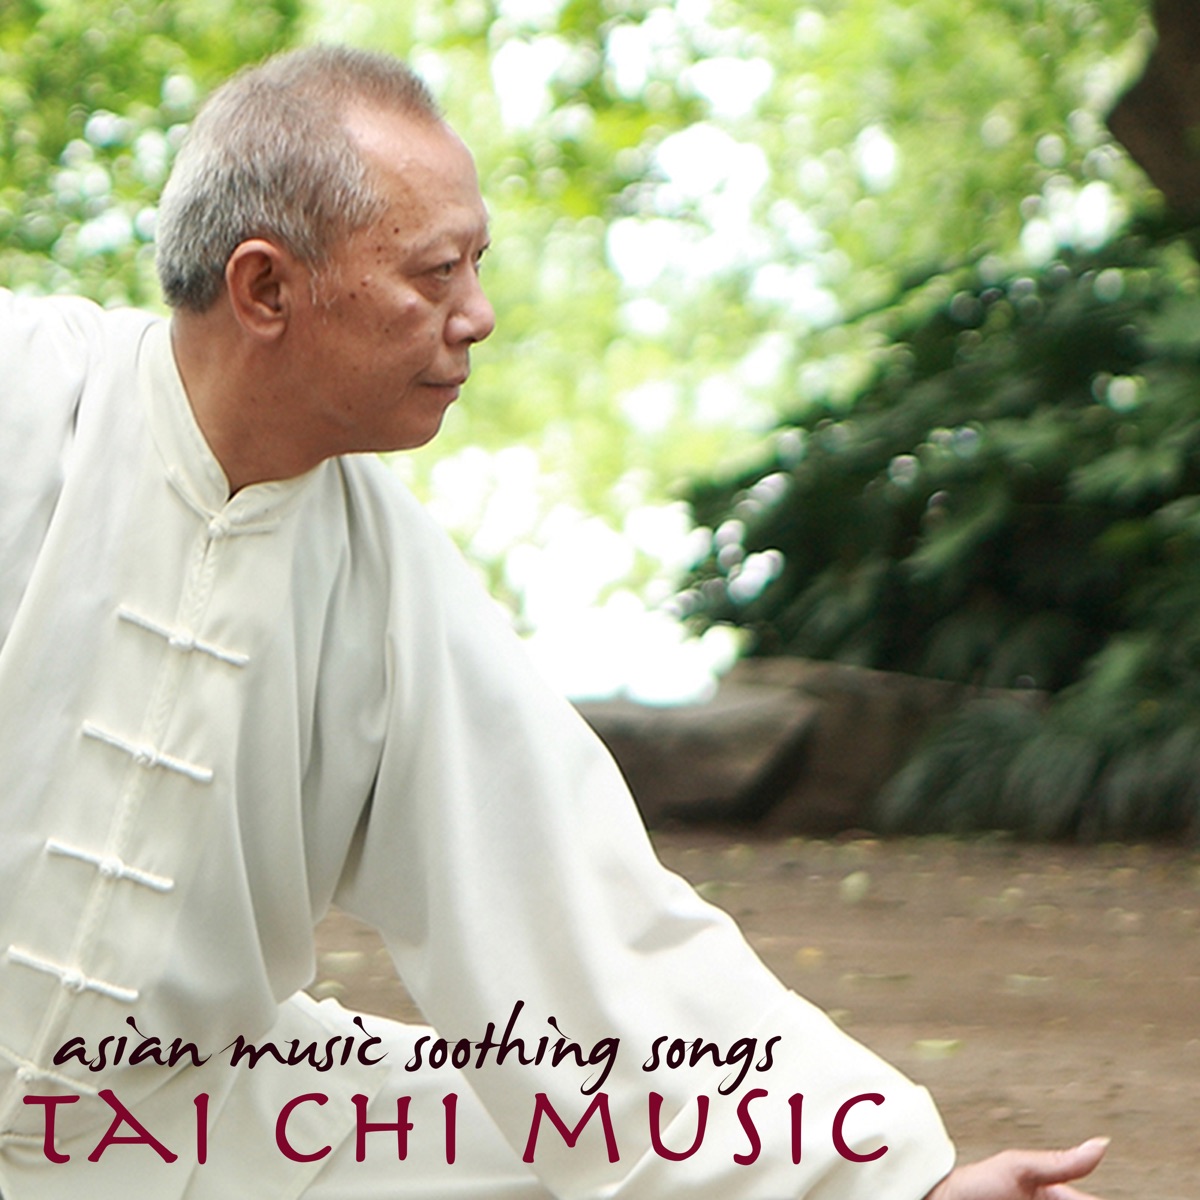 Tai Chi Music: Chinese Songs New Age & Classical Relaxing Music for Tai Chi  Chuan, Reiki & Yoga by tai chi on Apple Music